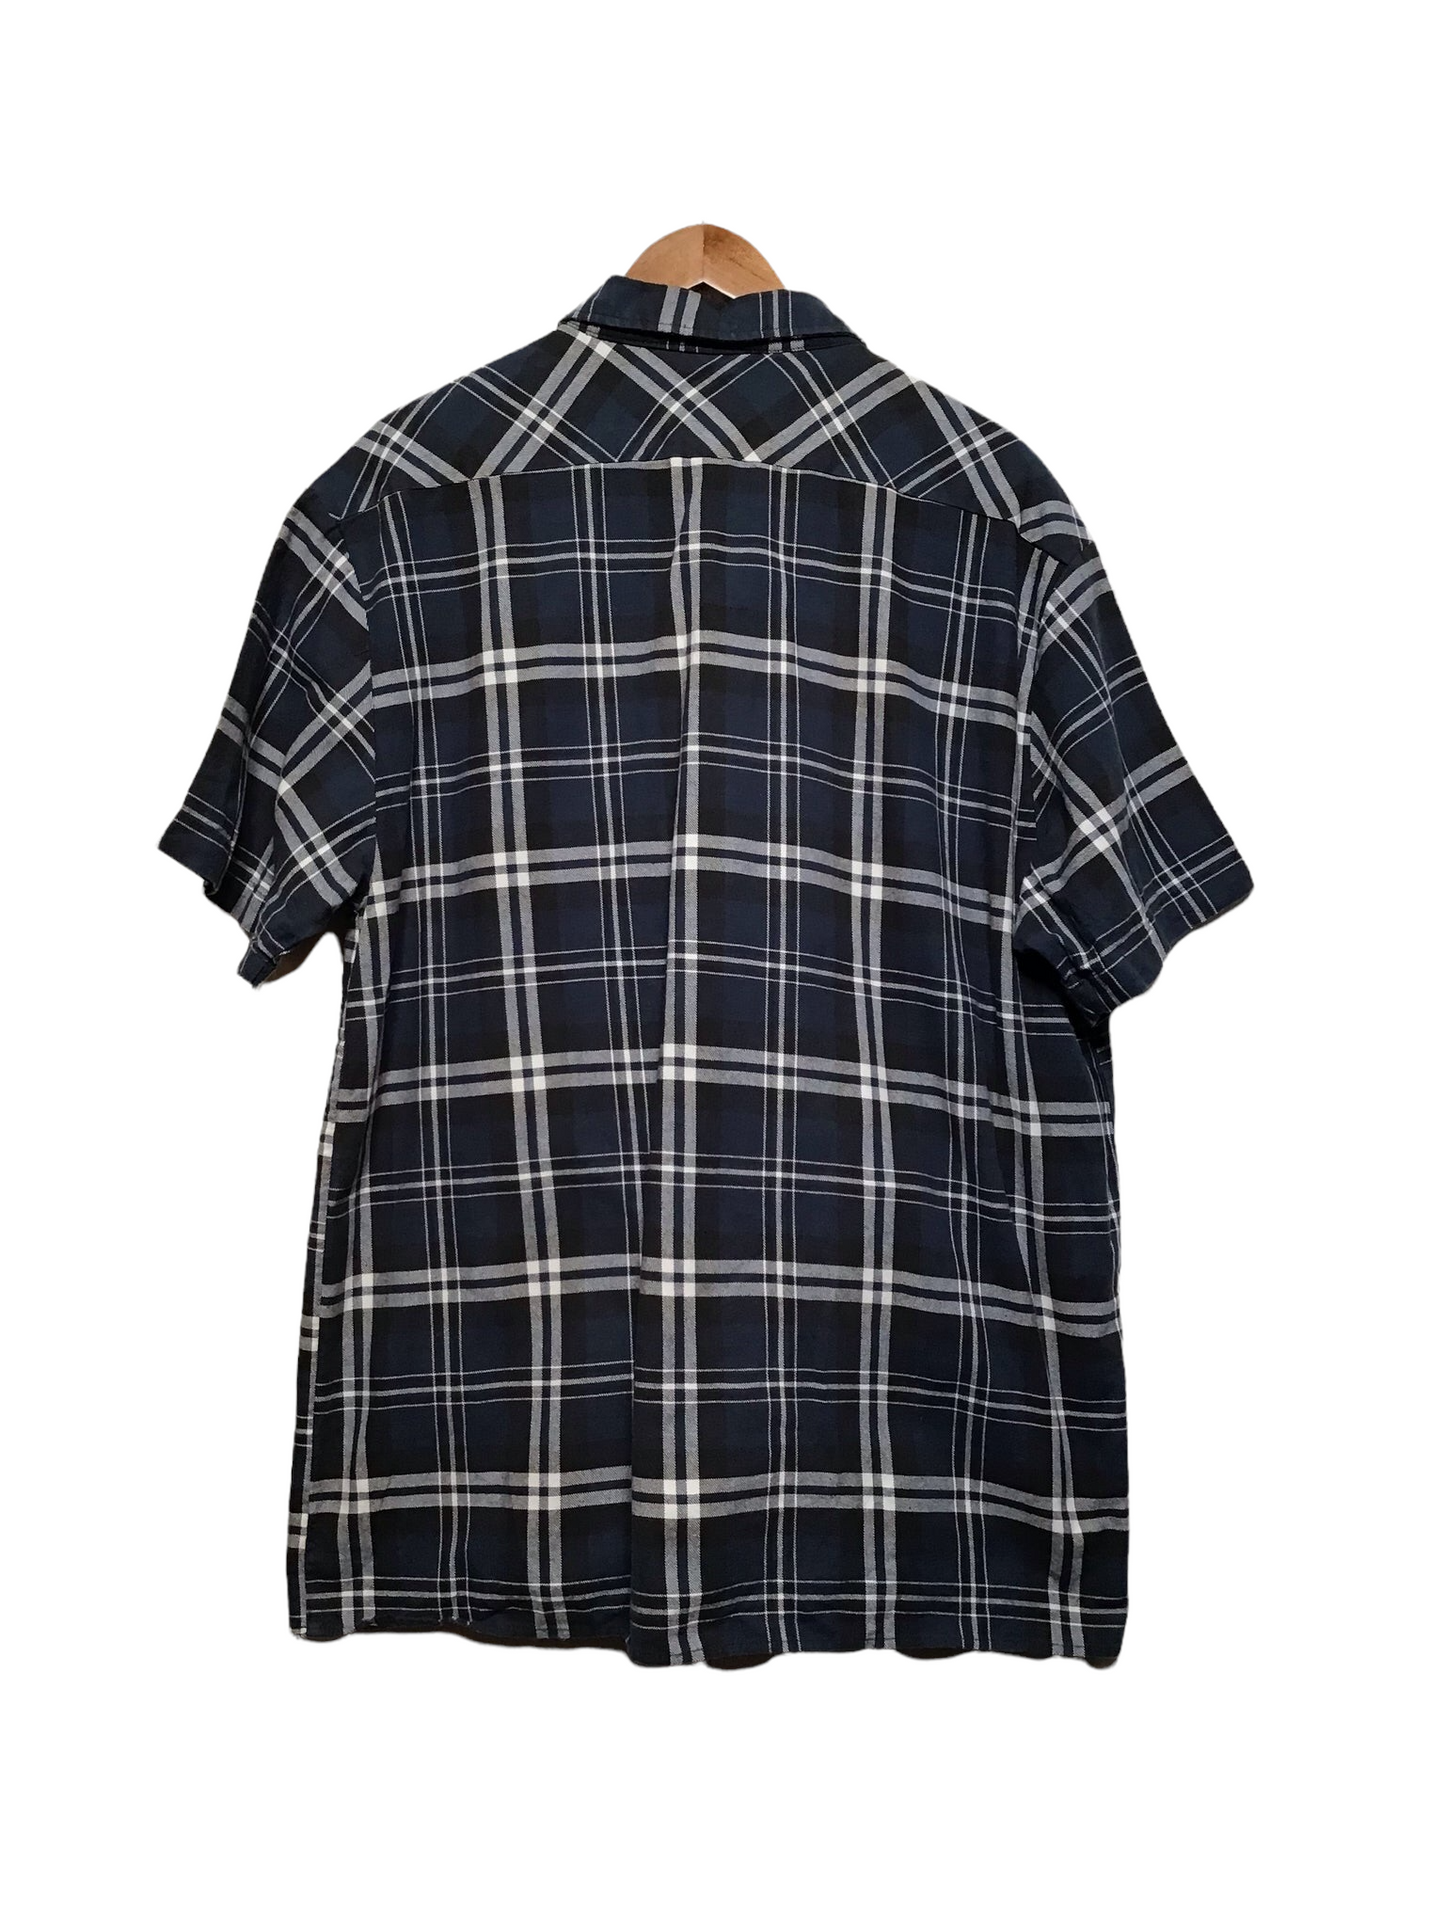 Dickies Chequered Work Shirt (Size XL)